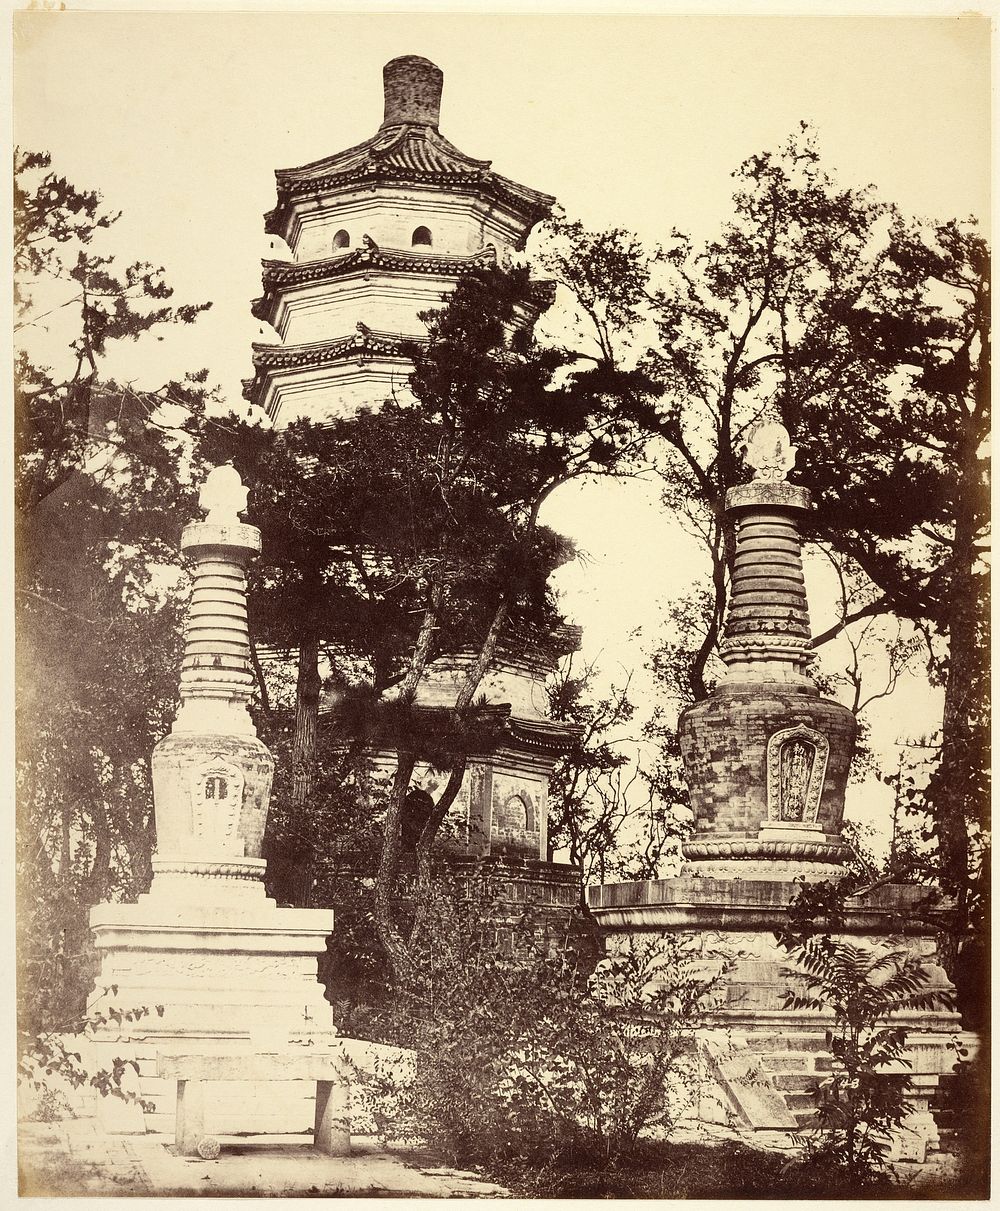 Pagoda up in the Hill, - Summer Palace, Yuen-Ming-Yuen, Peking by Felice Beato and Henry Hering